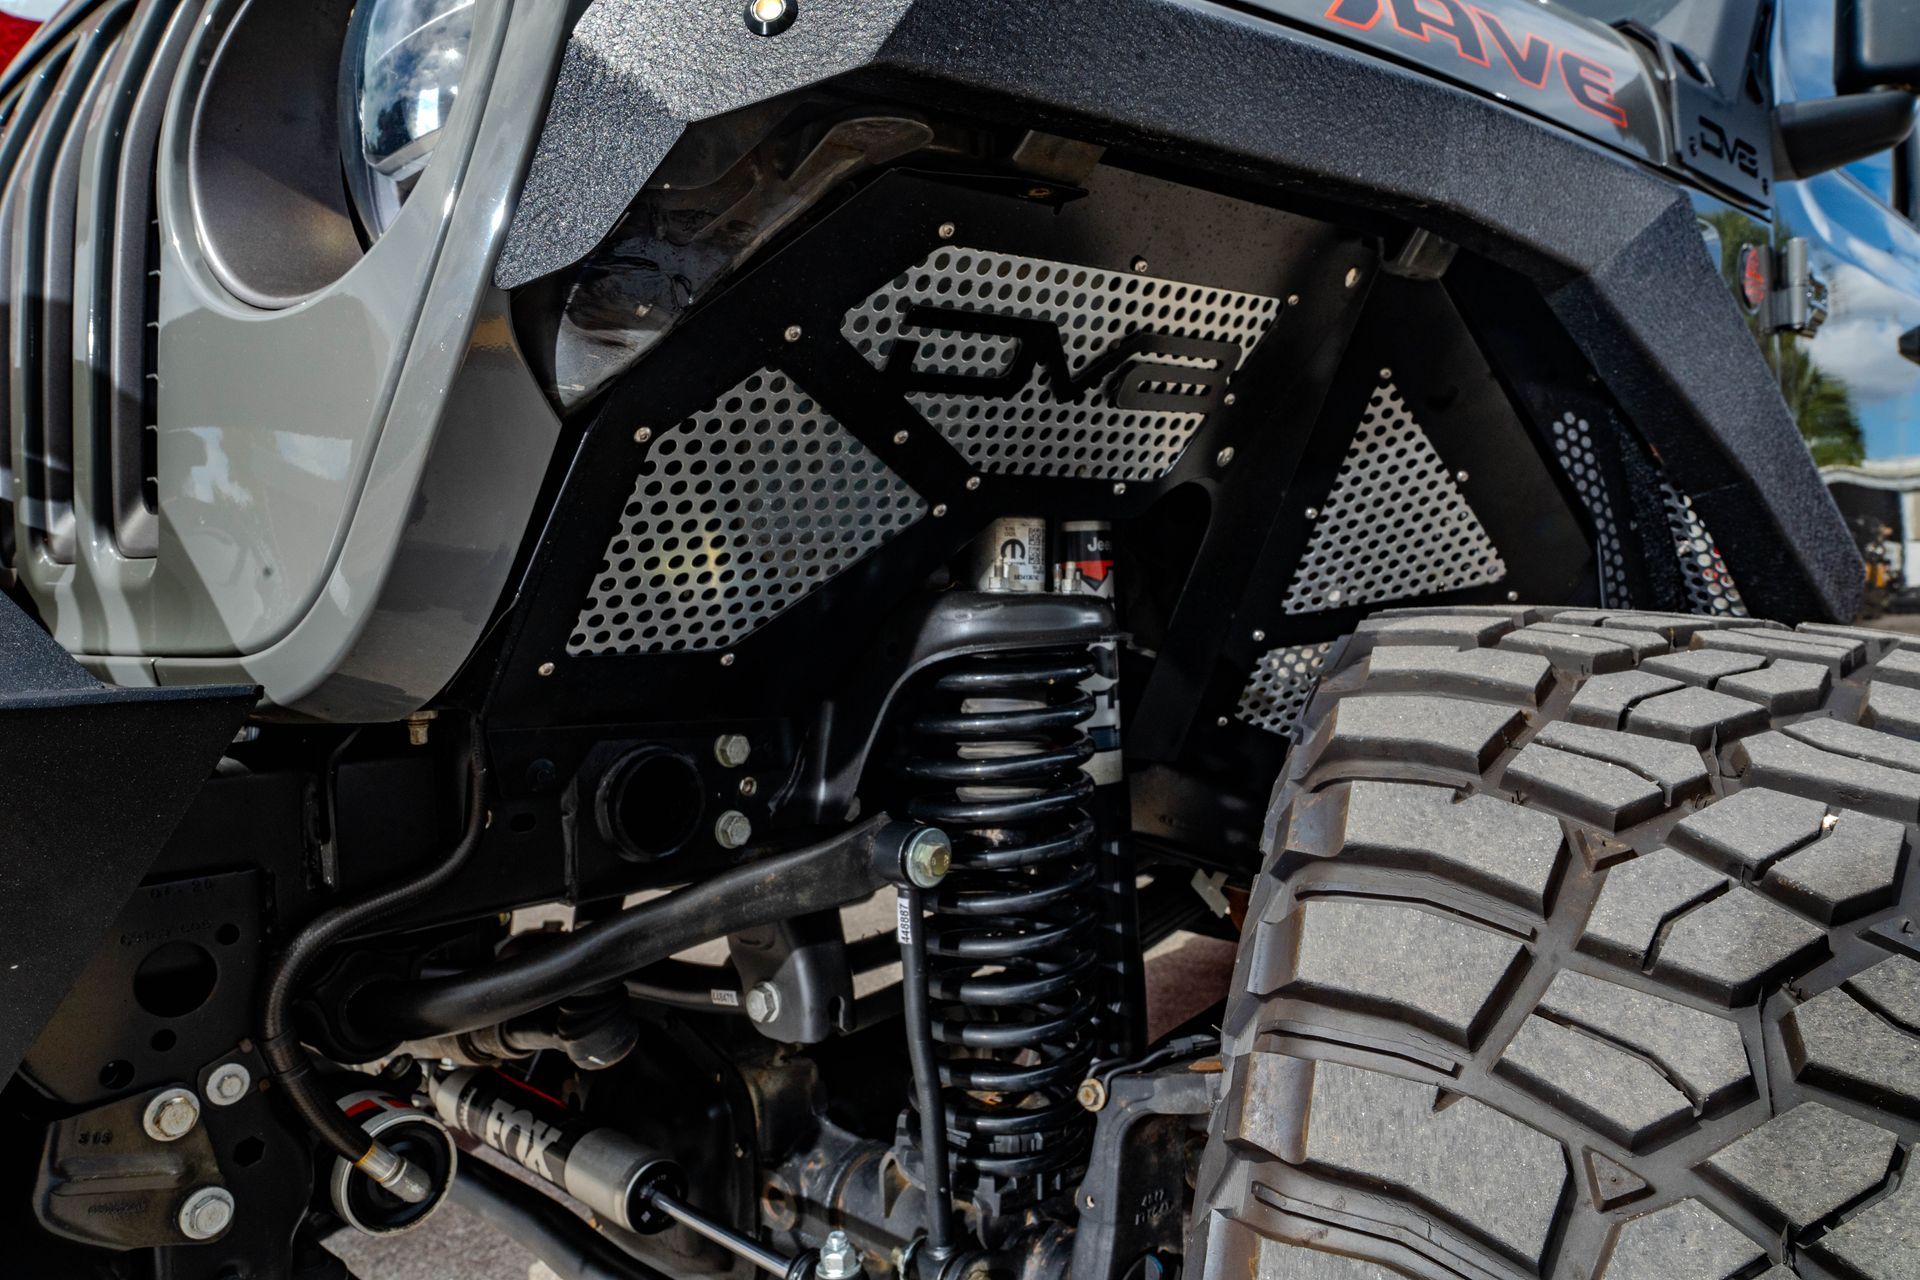 A close up of the front end of a jeep with a suspension system.